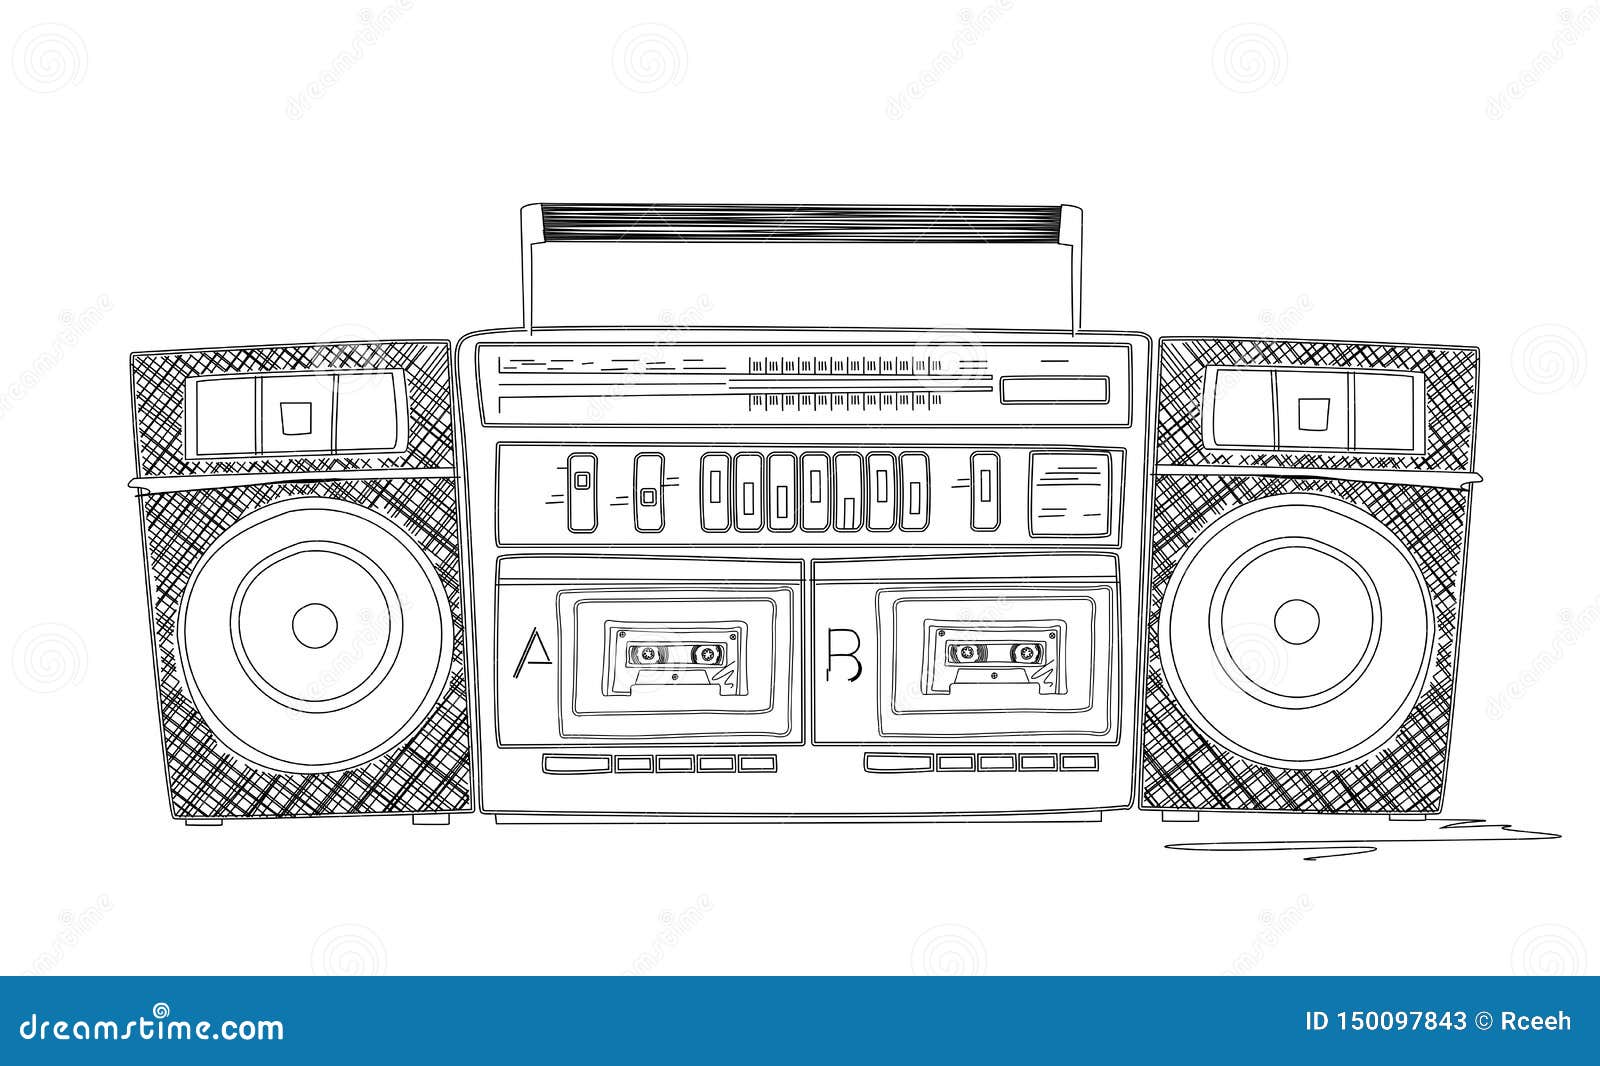 Boombox sketch stock vector. Illustration of sketch - 150097843